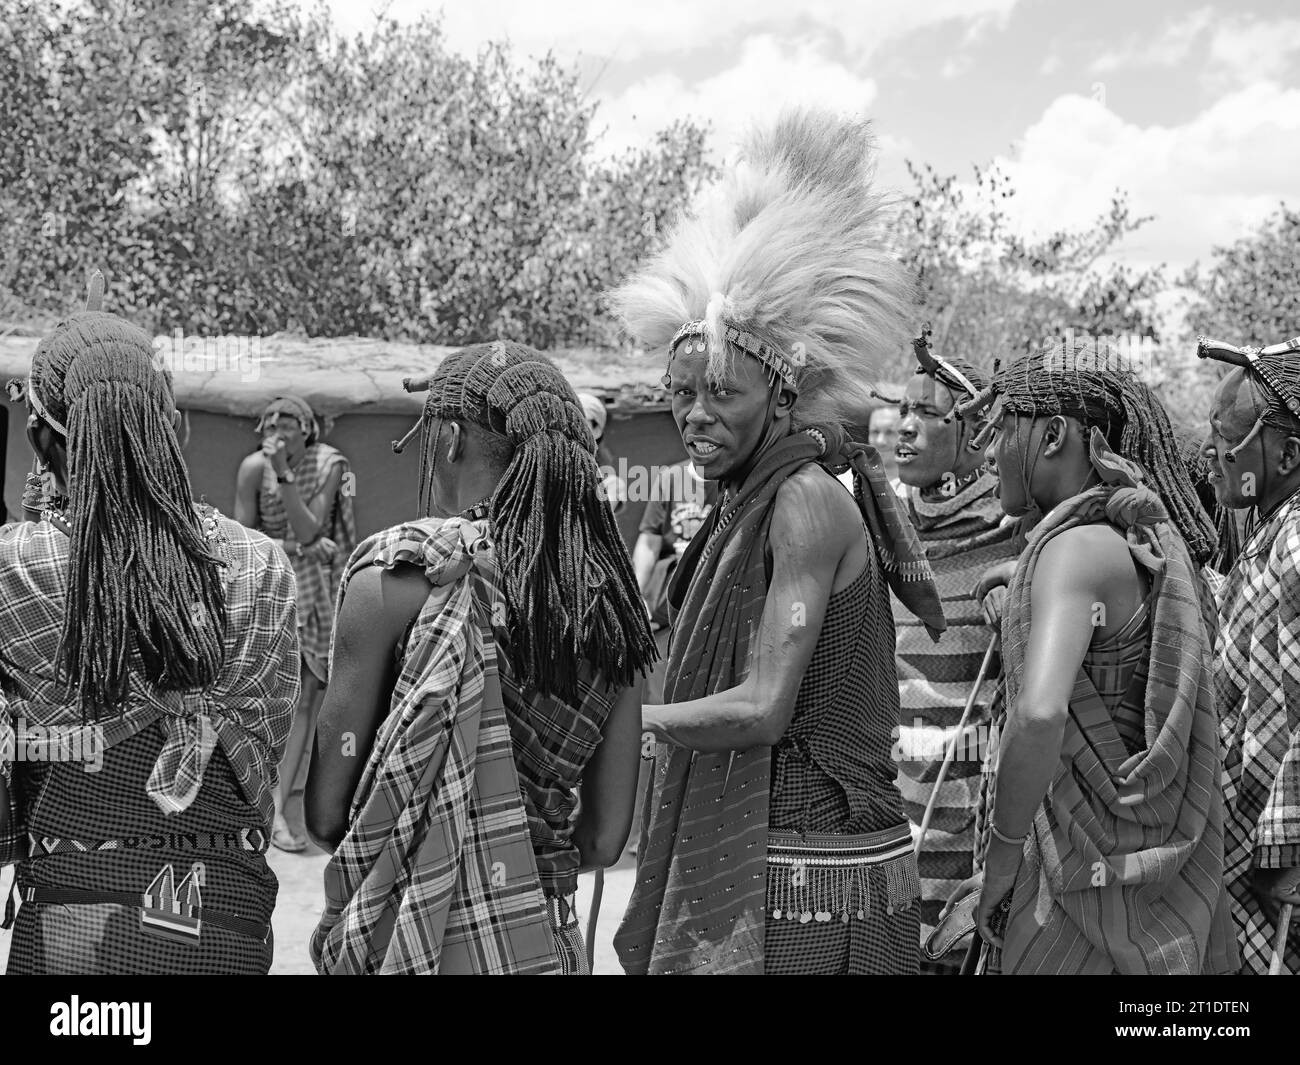 Tribal people of Maasai Mara, Kenya entertaining the visitors from abroad to their village while one turns and looks at the camera Stock Photo